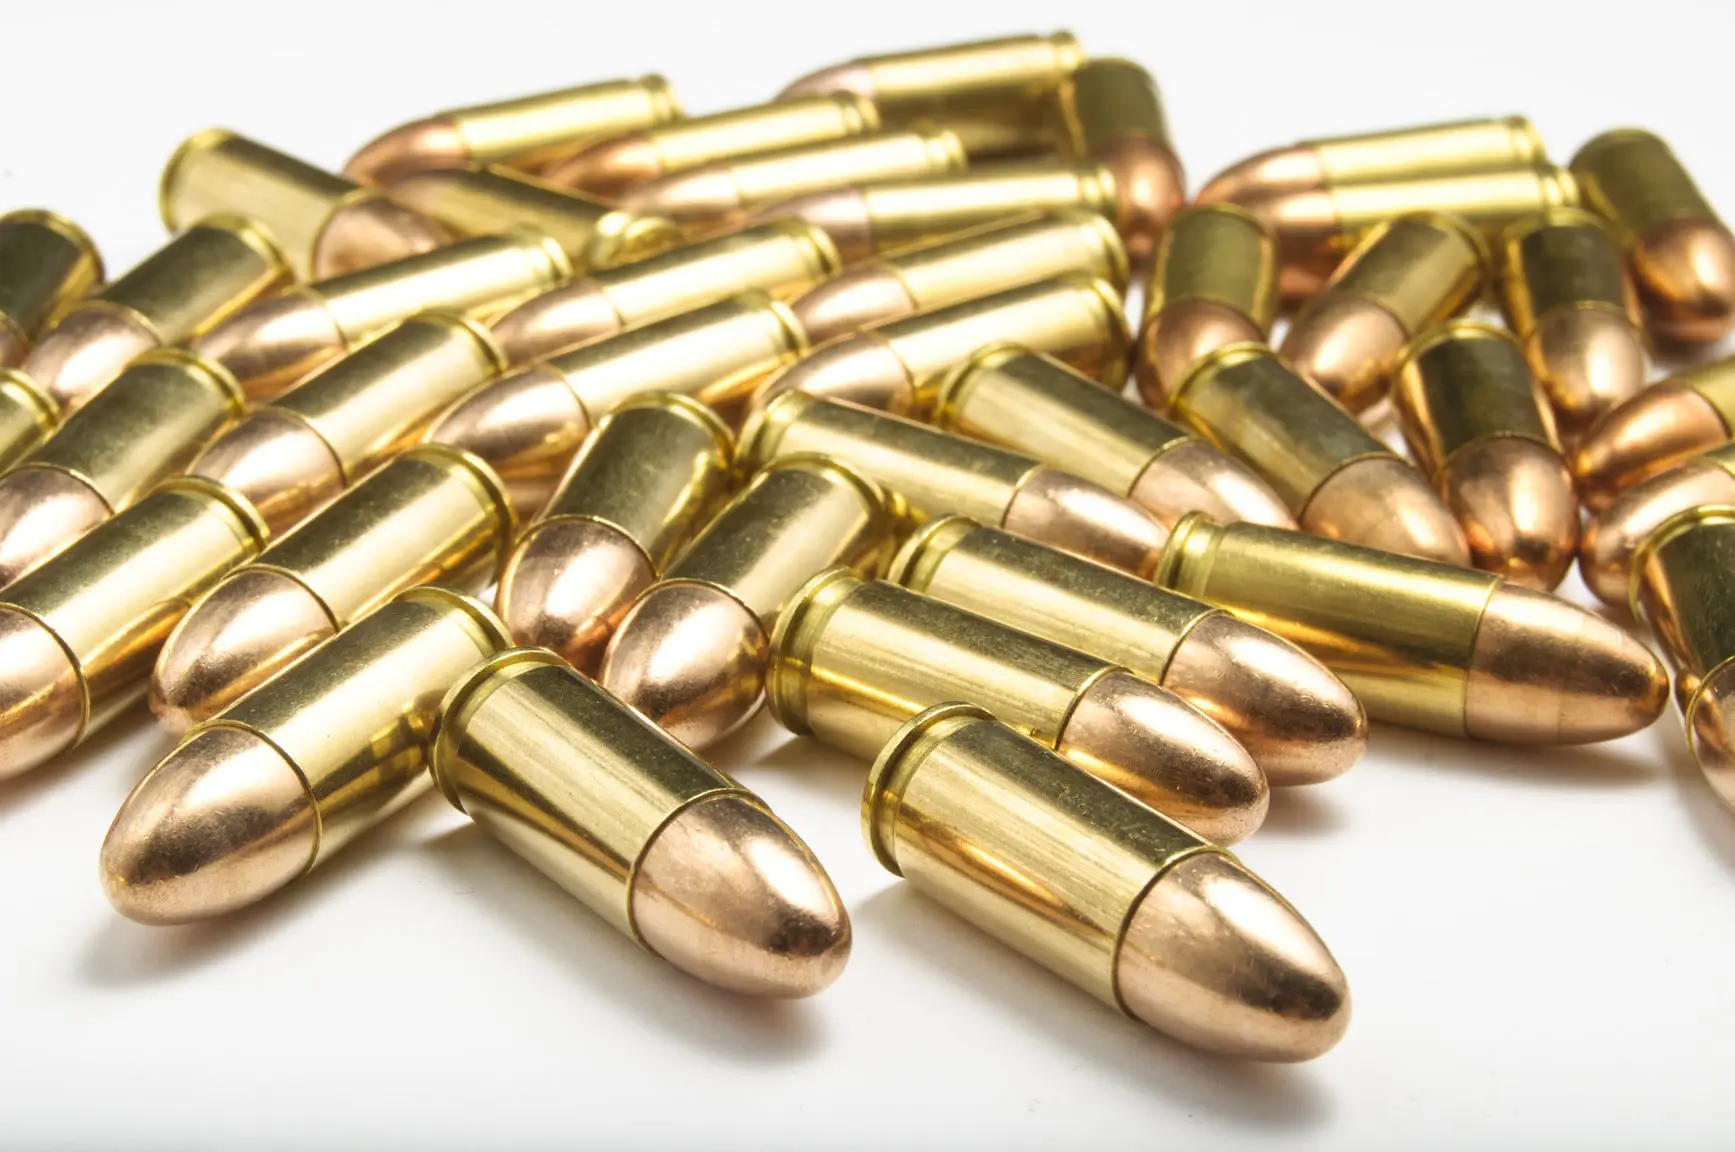 Ammo for sale online